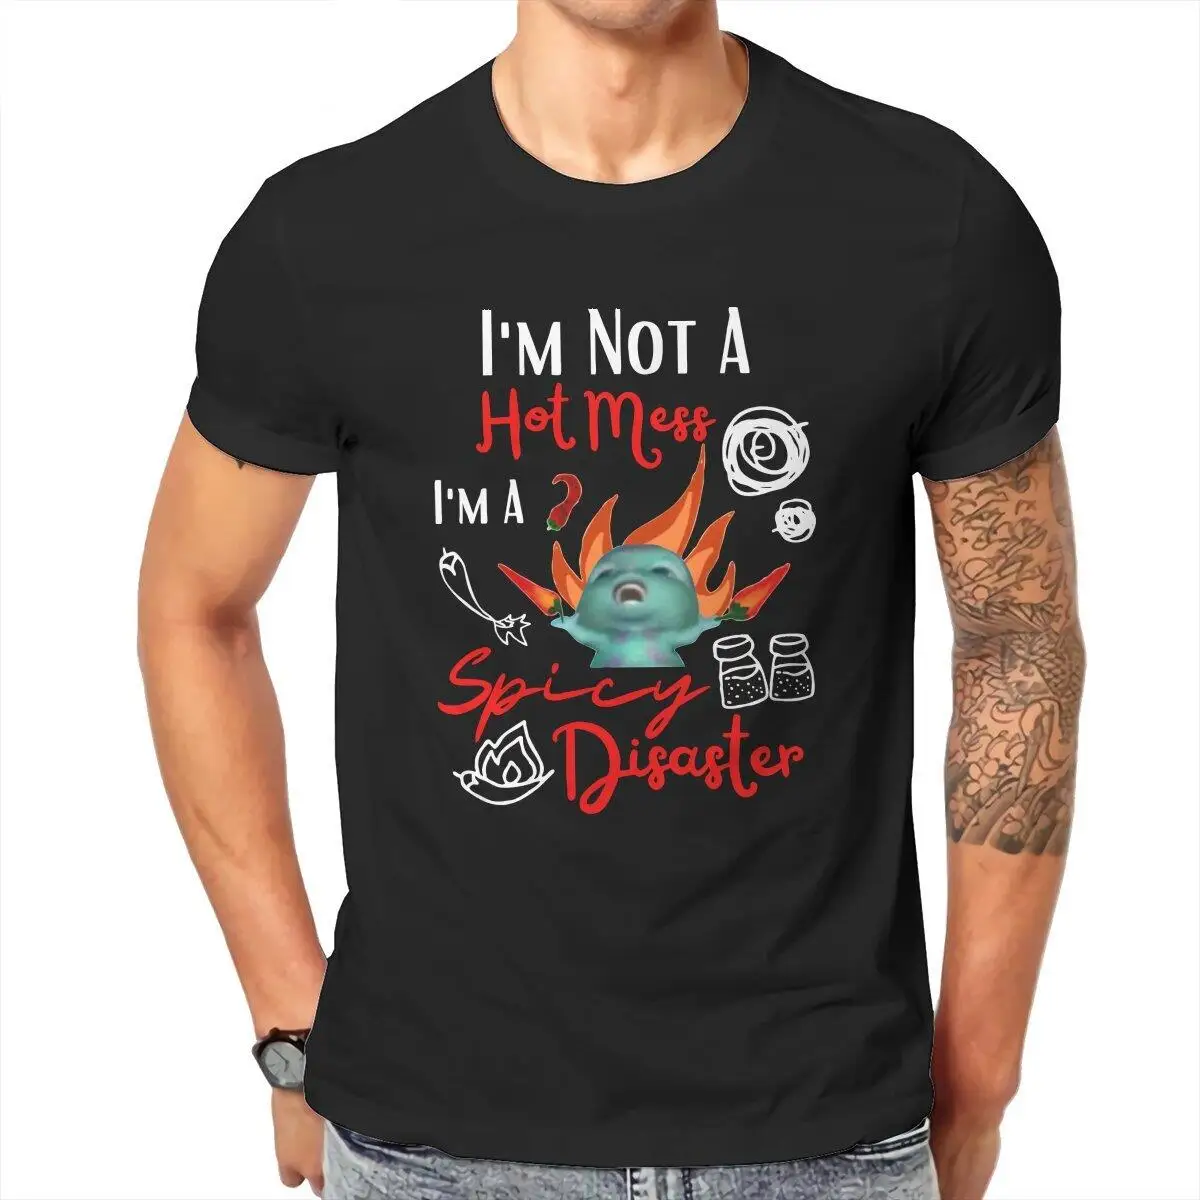 Men T-Shirts Bibble I Am Not A Hot Mess I Am A Spicy Disaster  Casual Cotton Tees Short Sleeve  T Shirt Crew Neck Clothes Party